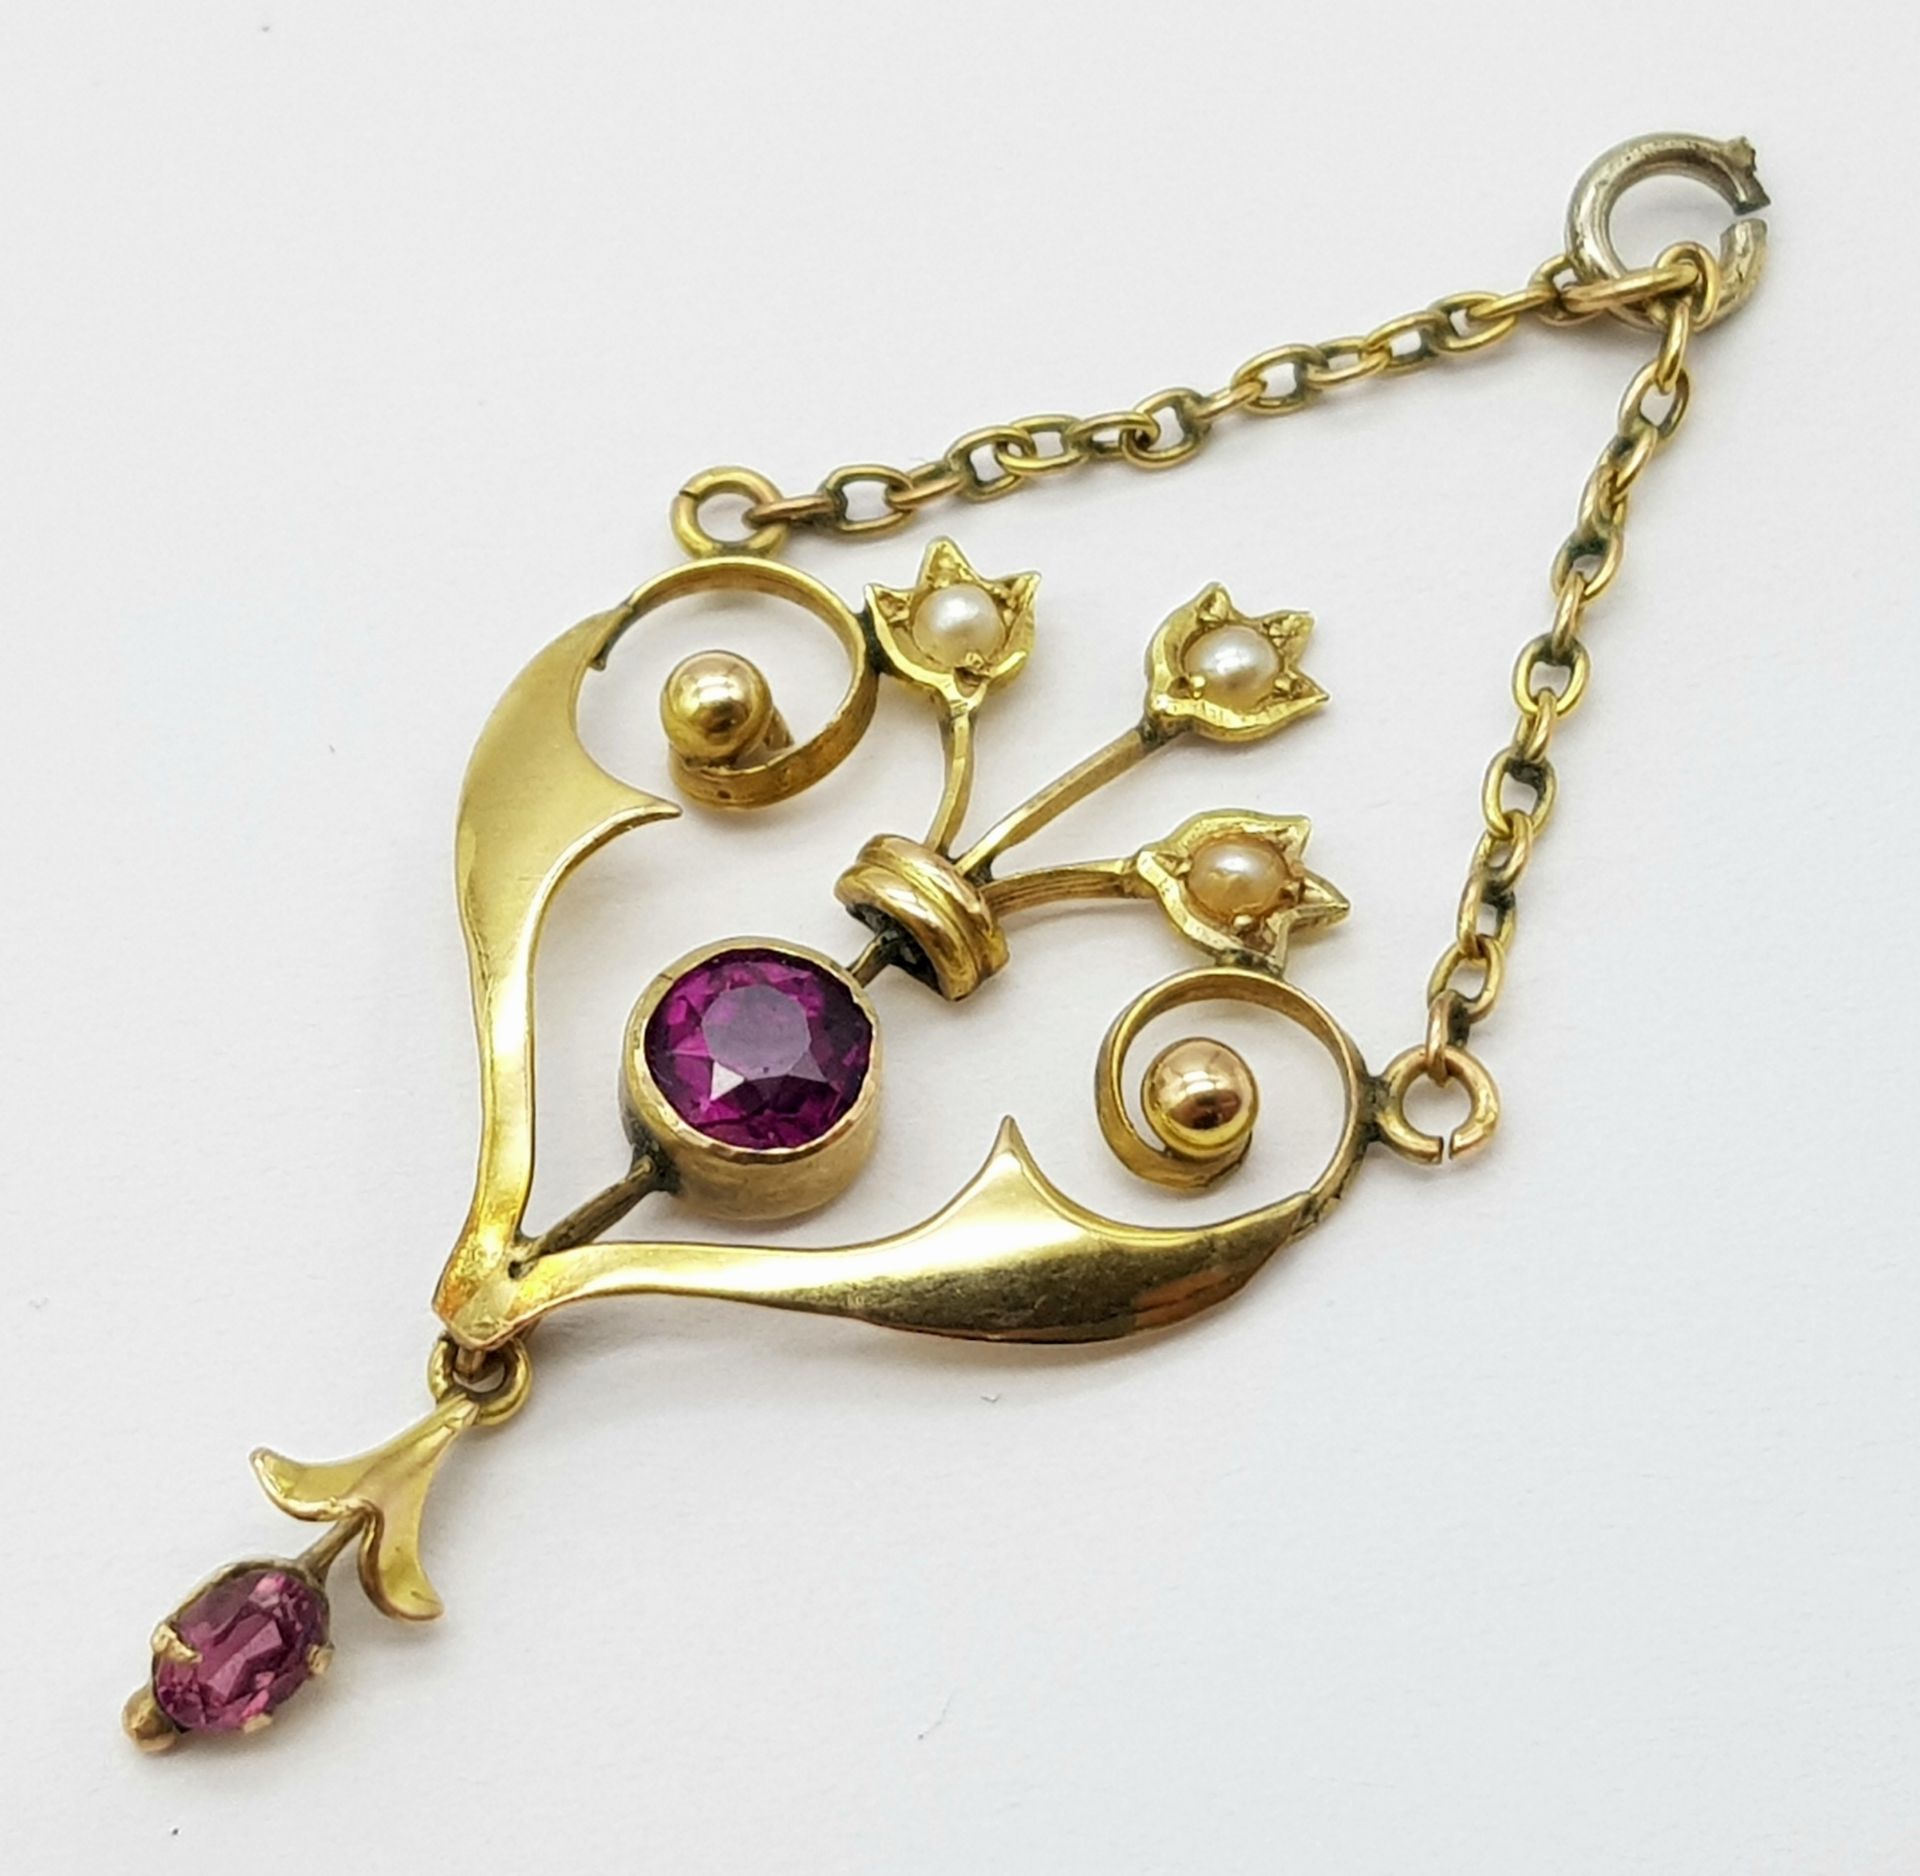 An Antique 9K Yellow Gold Amethyst and Seed Pearl Pendant. Beautiful floral design. 5cm. 1.8g